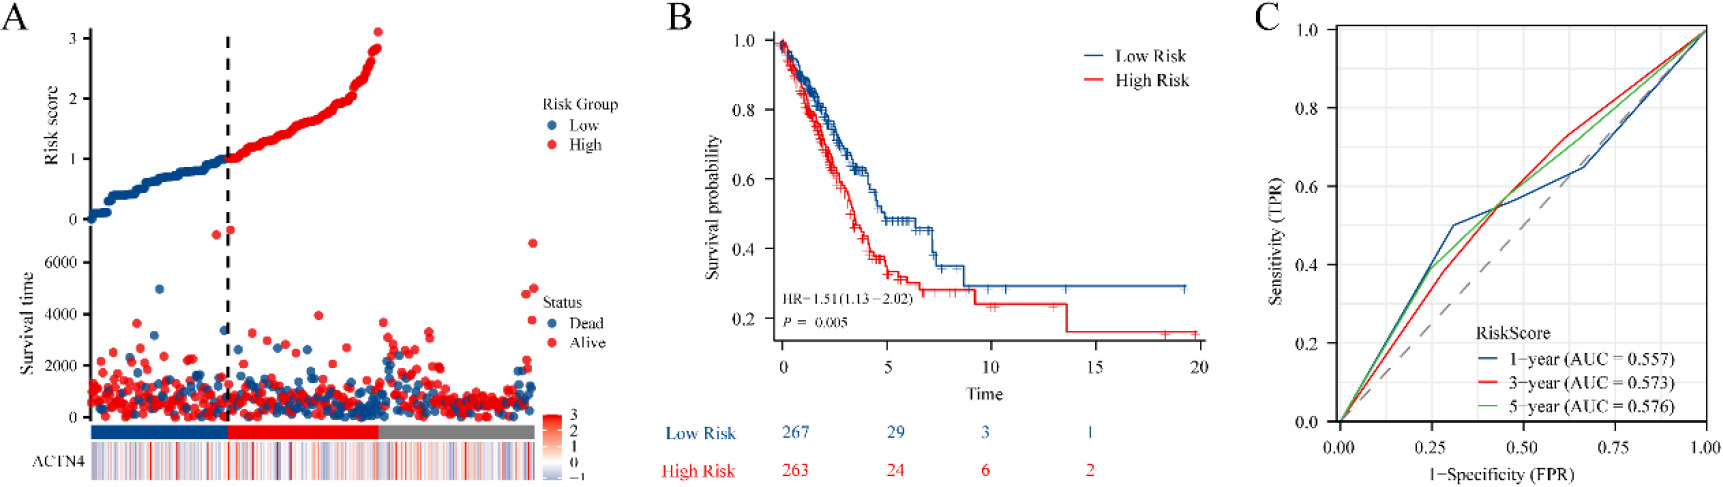 Construction of the prognostic model based on ACTN4 and riskscore in TCGA-LUAD. (A) distribution of risk score, survival status and the expression of prognostic ACTN4. (B) Kaplan-Meier plot of the riskscore and overall survival. (C) ROCs for 1-year, 3-year and 5-year survival prediction.